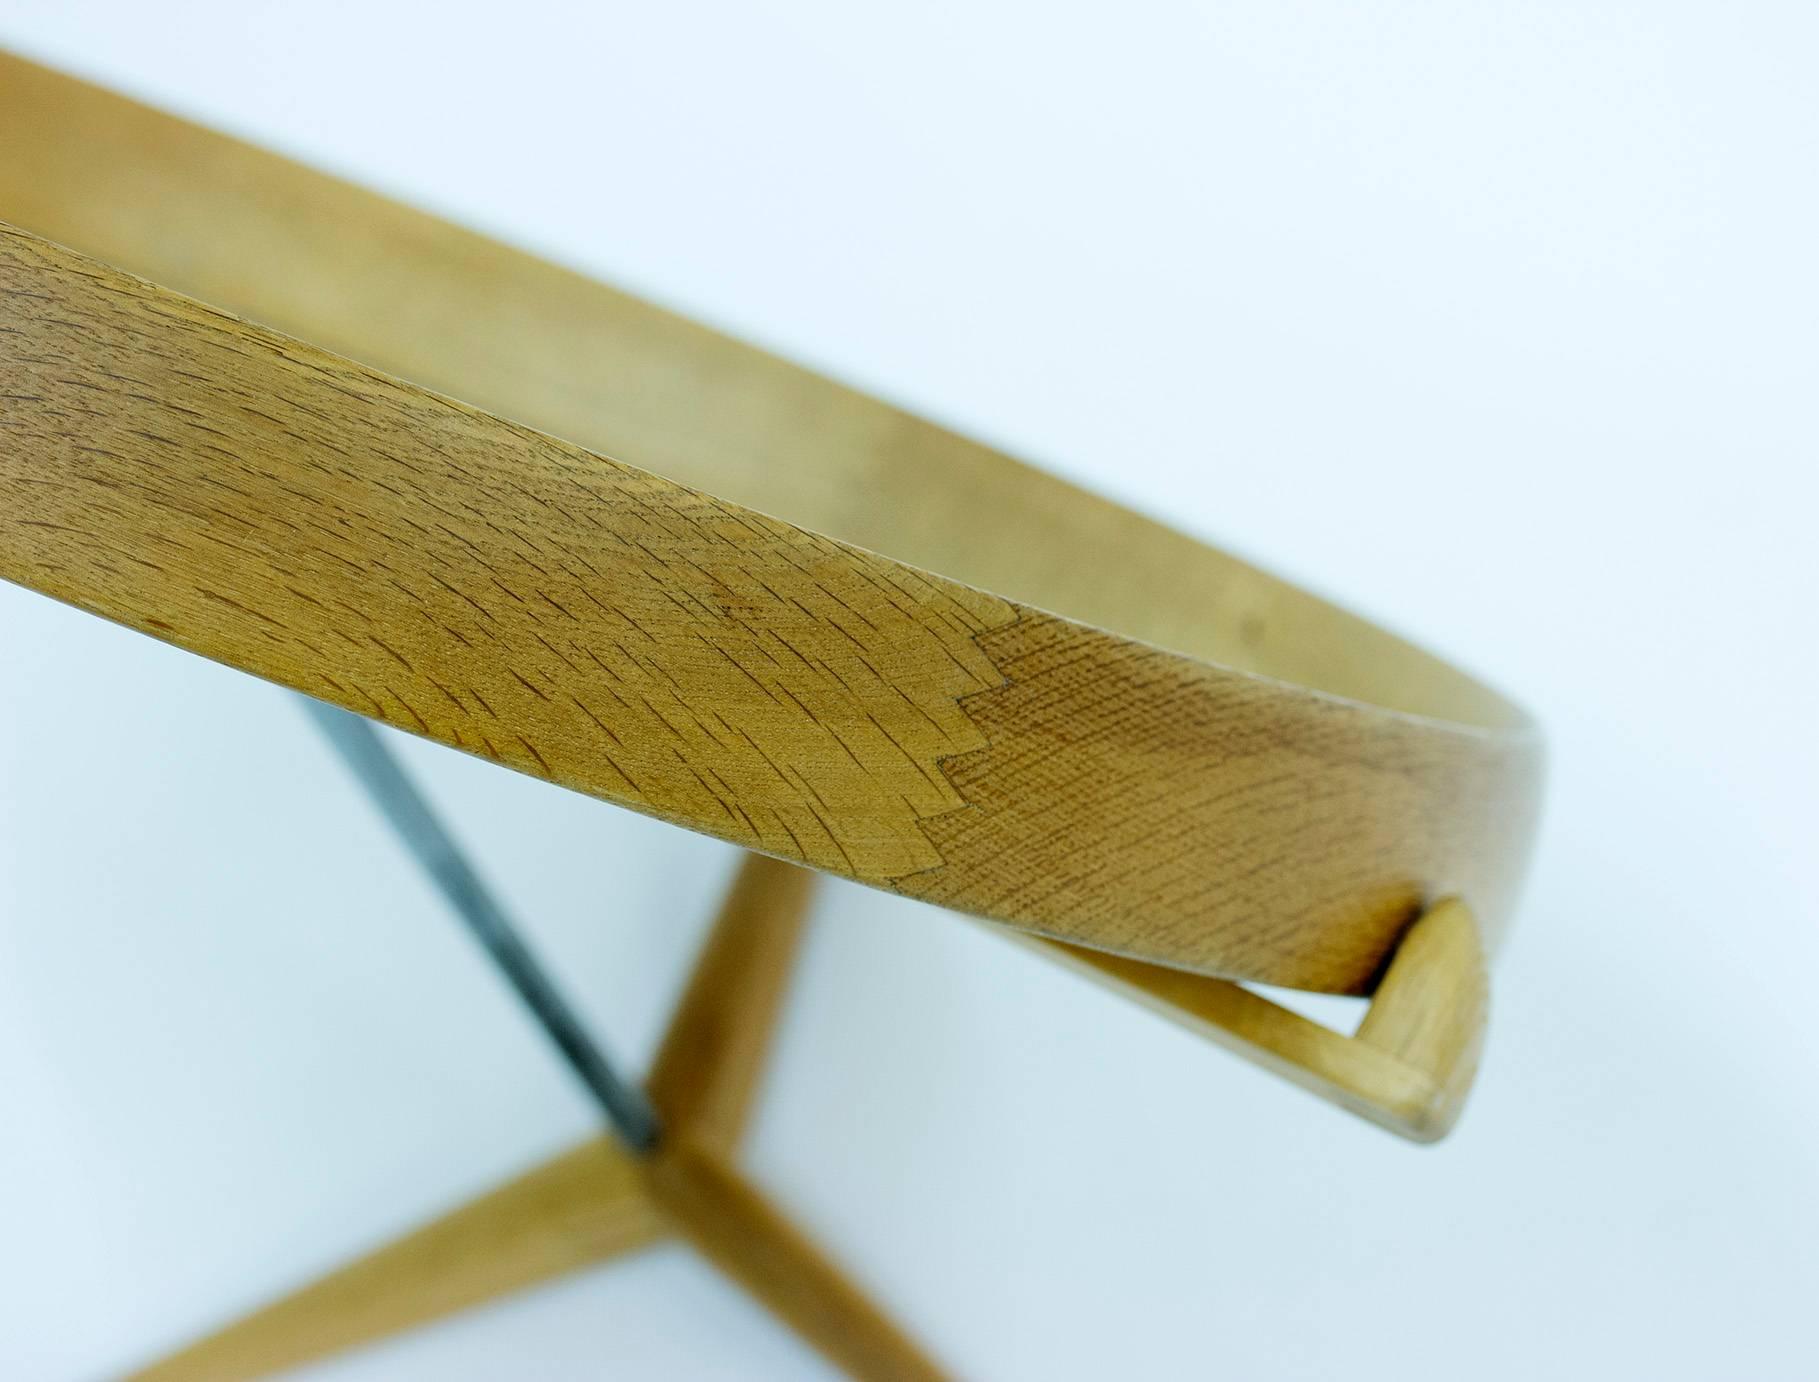 Swedish Teak Table Mirror by Uno and Osten Kristiansson